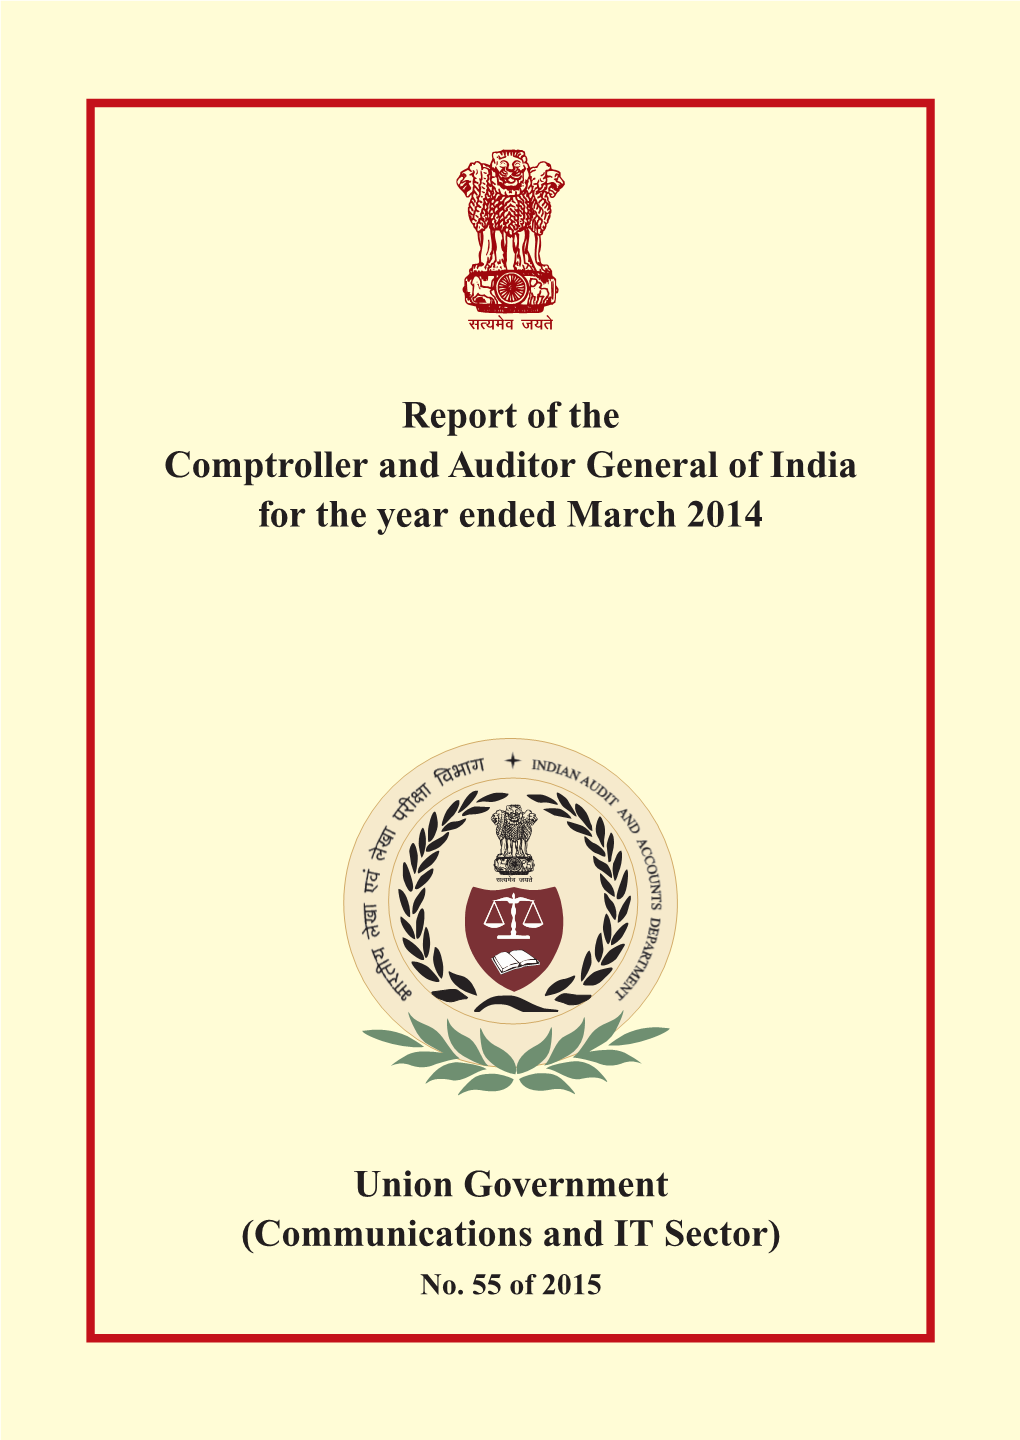 Union Government (Communications and IT Sector) No. 55 of 2015 CONTENTS